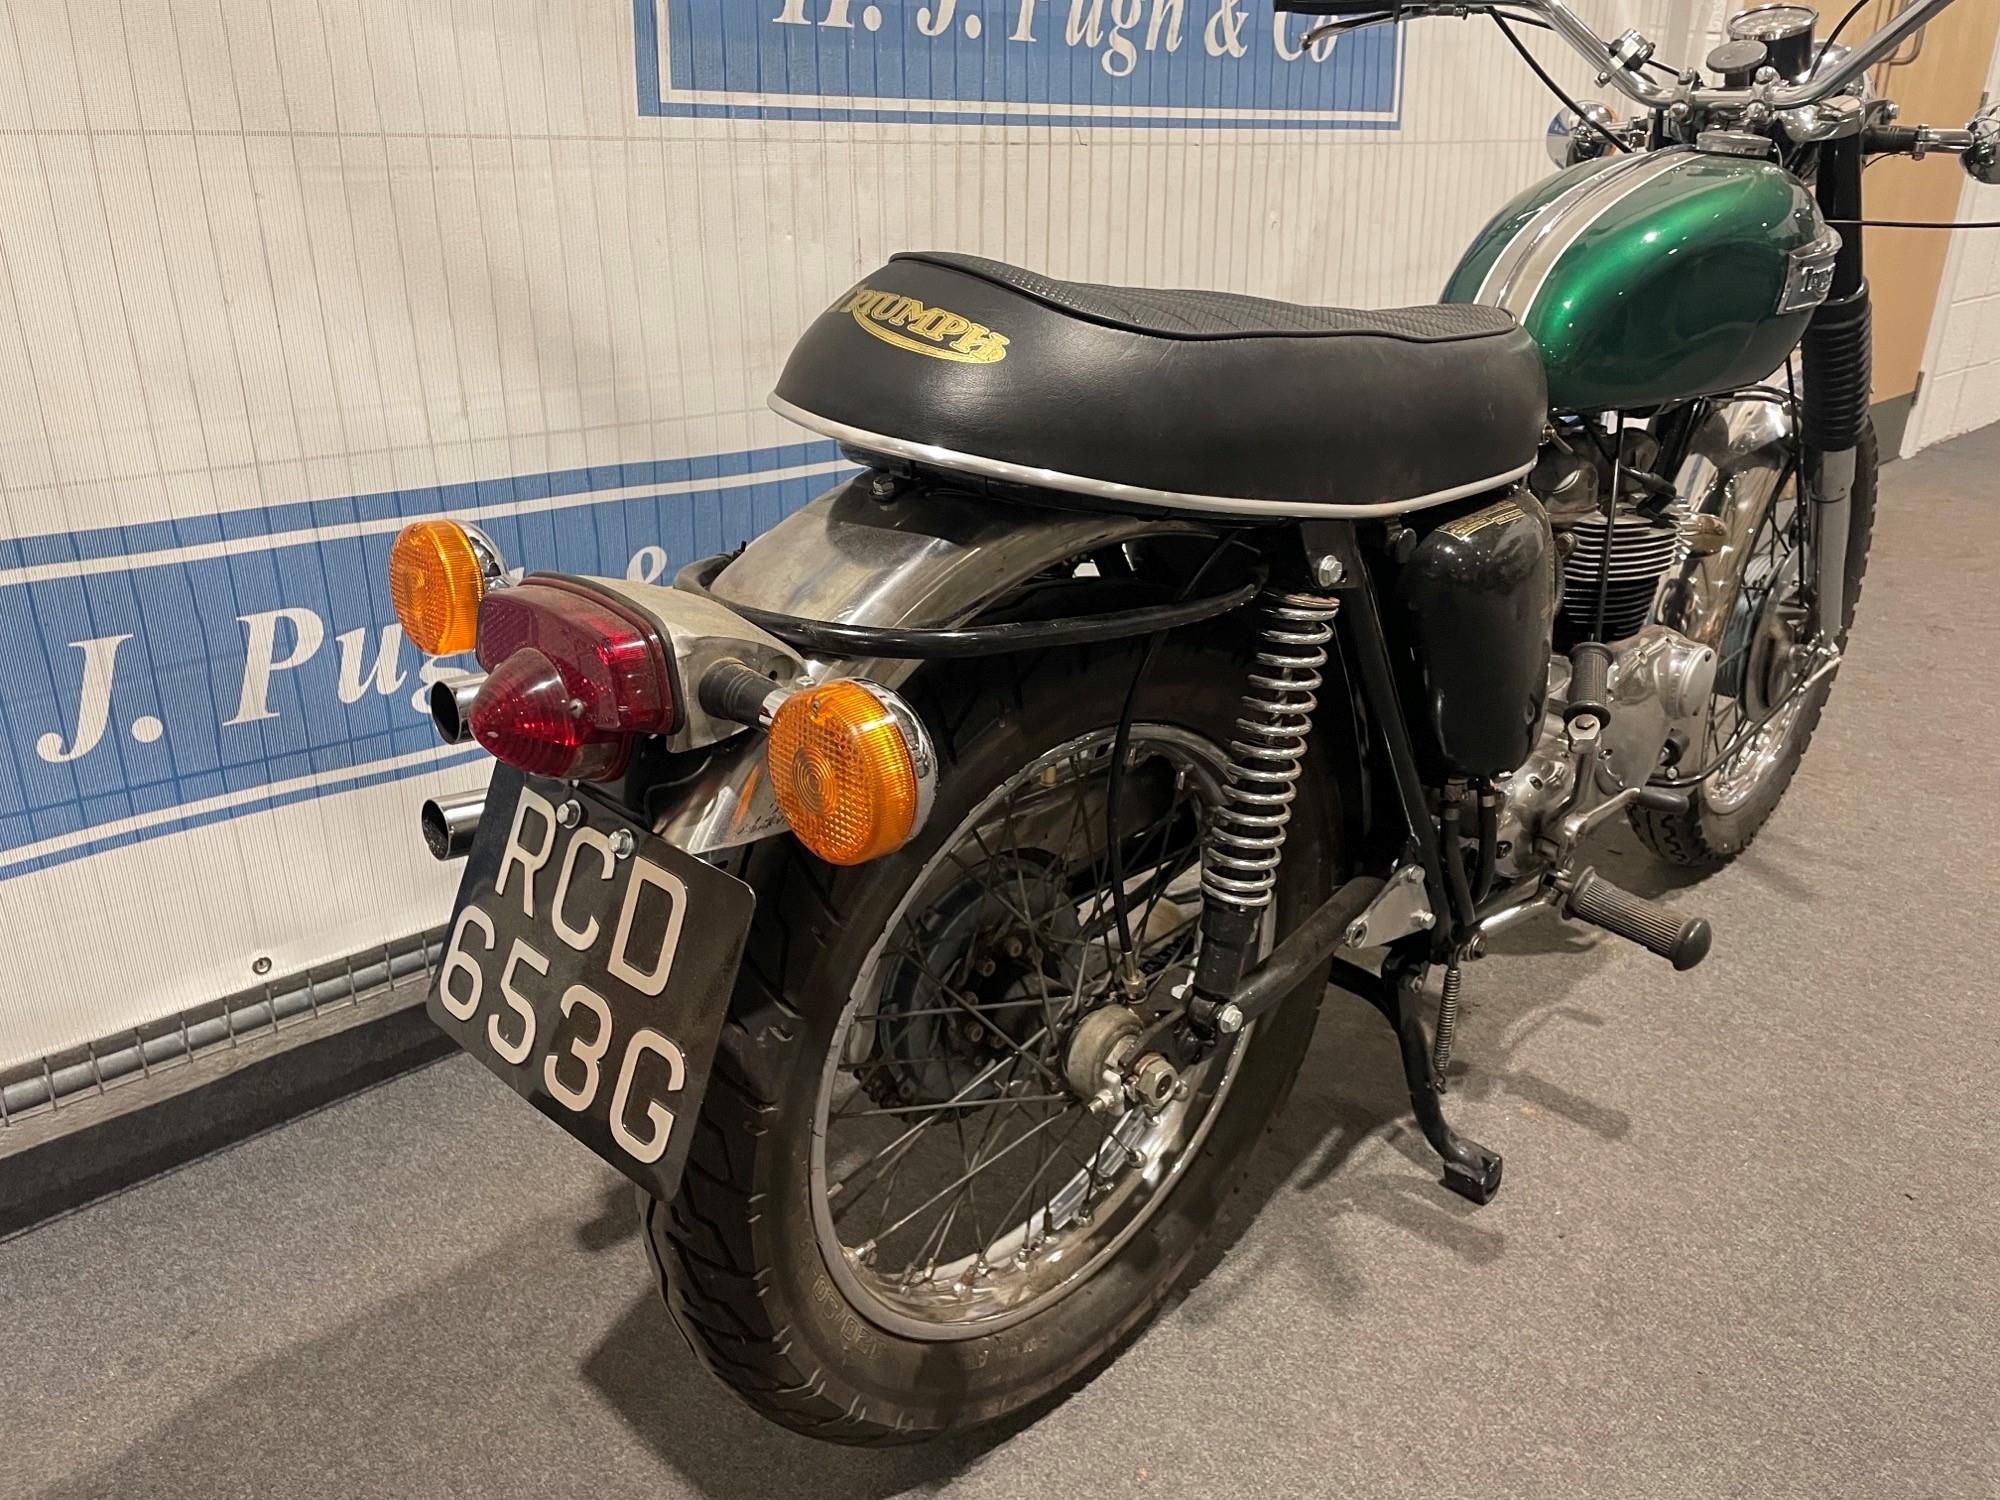 Triumph T100C motorcycle. 1969. Full working order. Originally exported to Johnson Motors, - Image 6 of 8